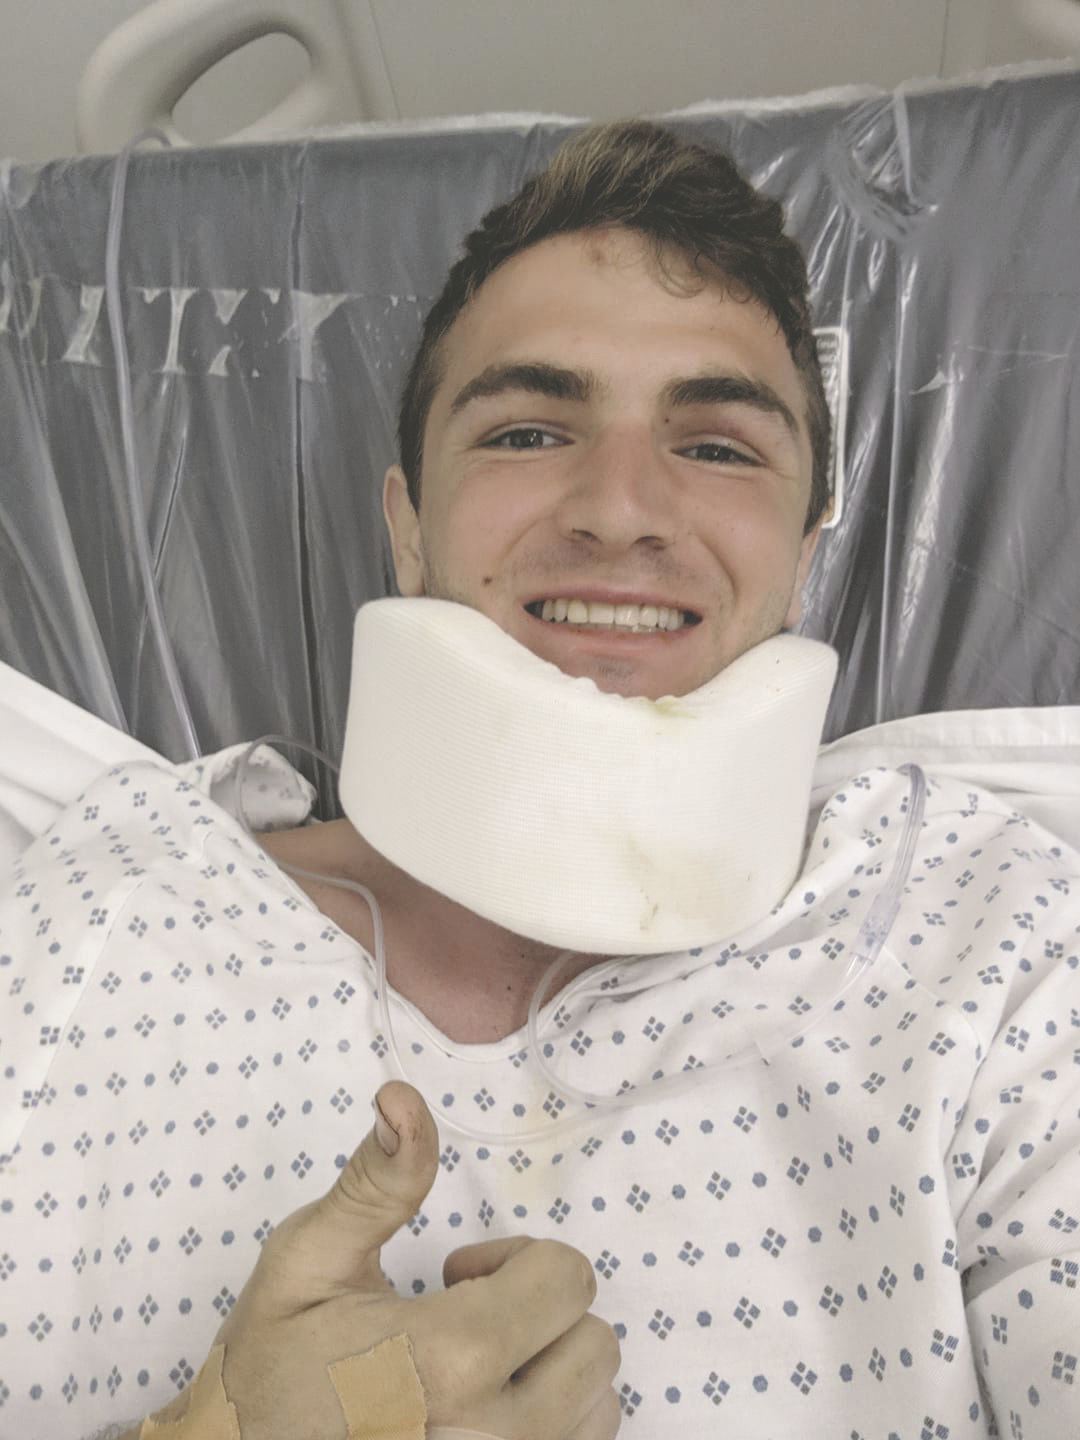 The main injury Clay Chastain suffered during his fall while climbing the volcano, Mt. Liamuiga, in St. Kitts was a skull fracture. The injury has prevented him from flying commercial. Clay and his wife Acaimie are expected to be airlifted from St. Kitts to Ft. Lauderdale, Florida later today.